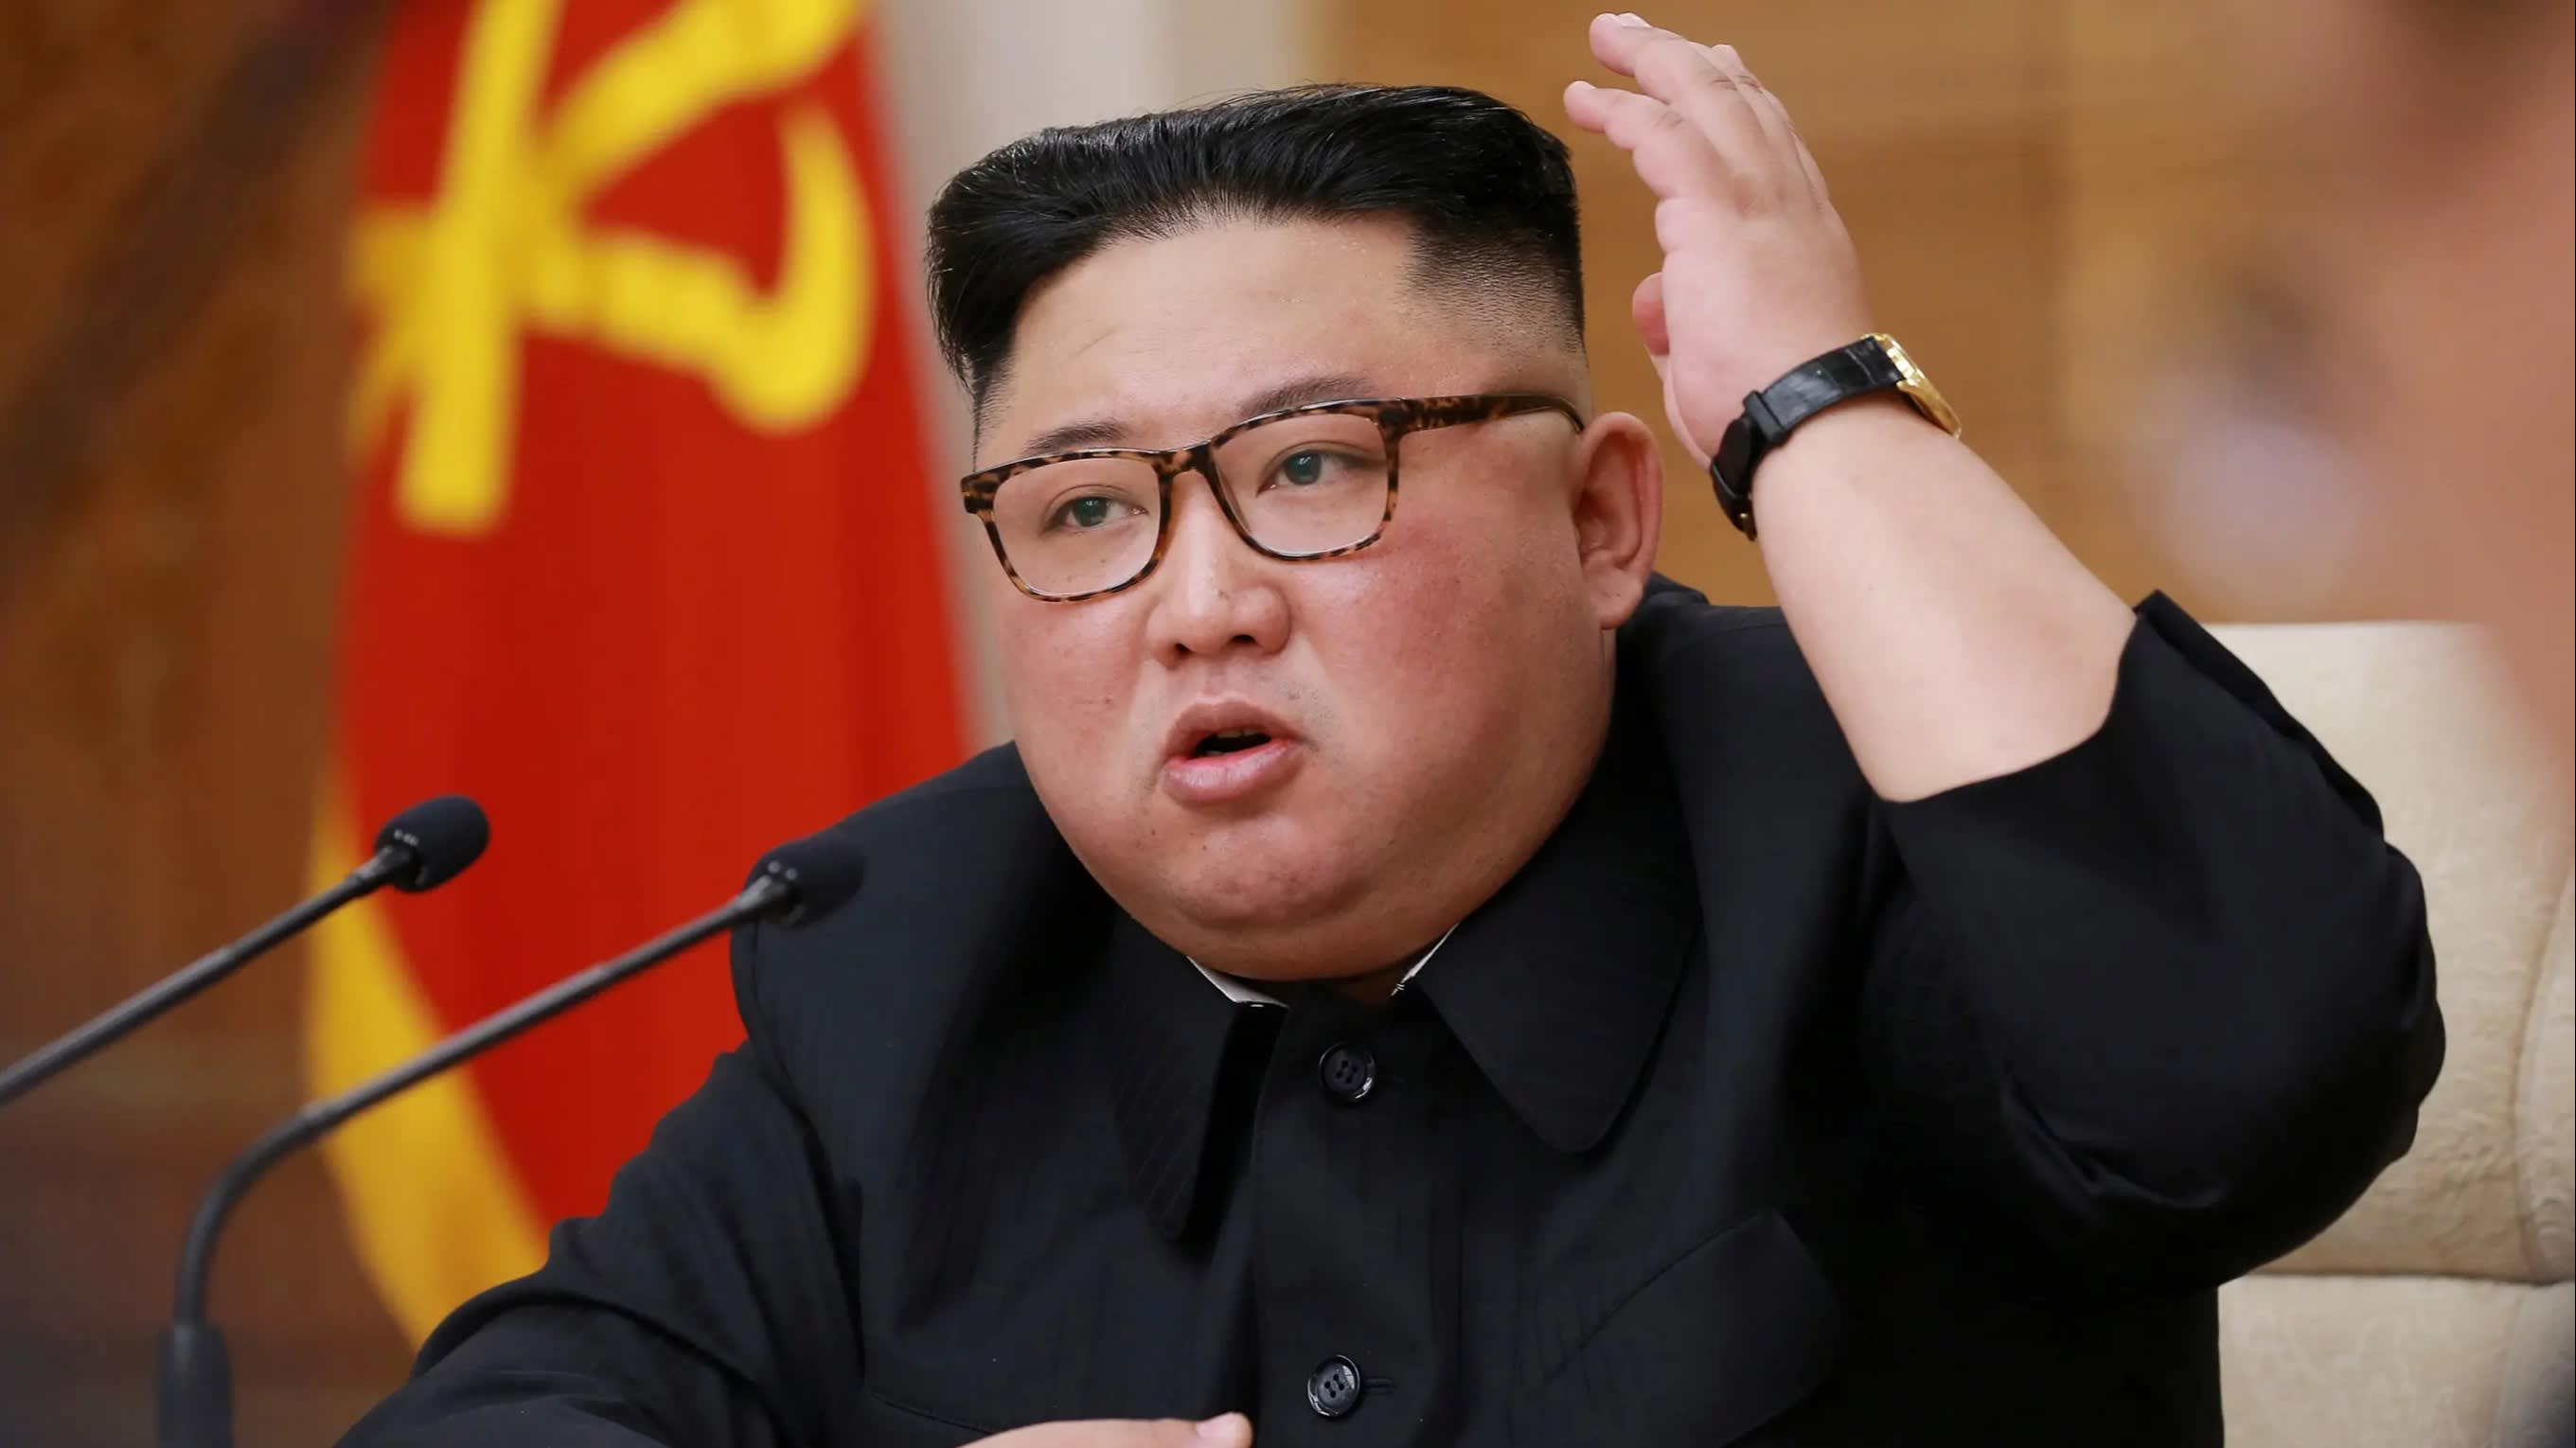 South Korea looking into reports about Kim Jong Uns health